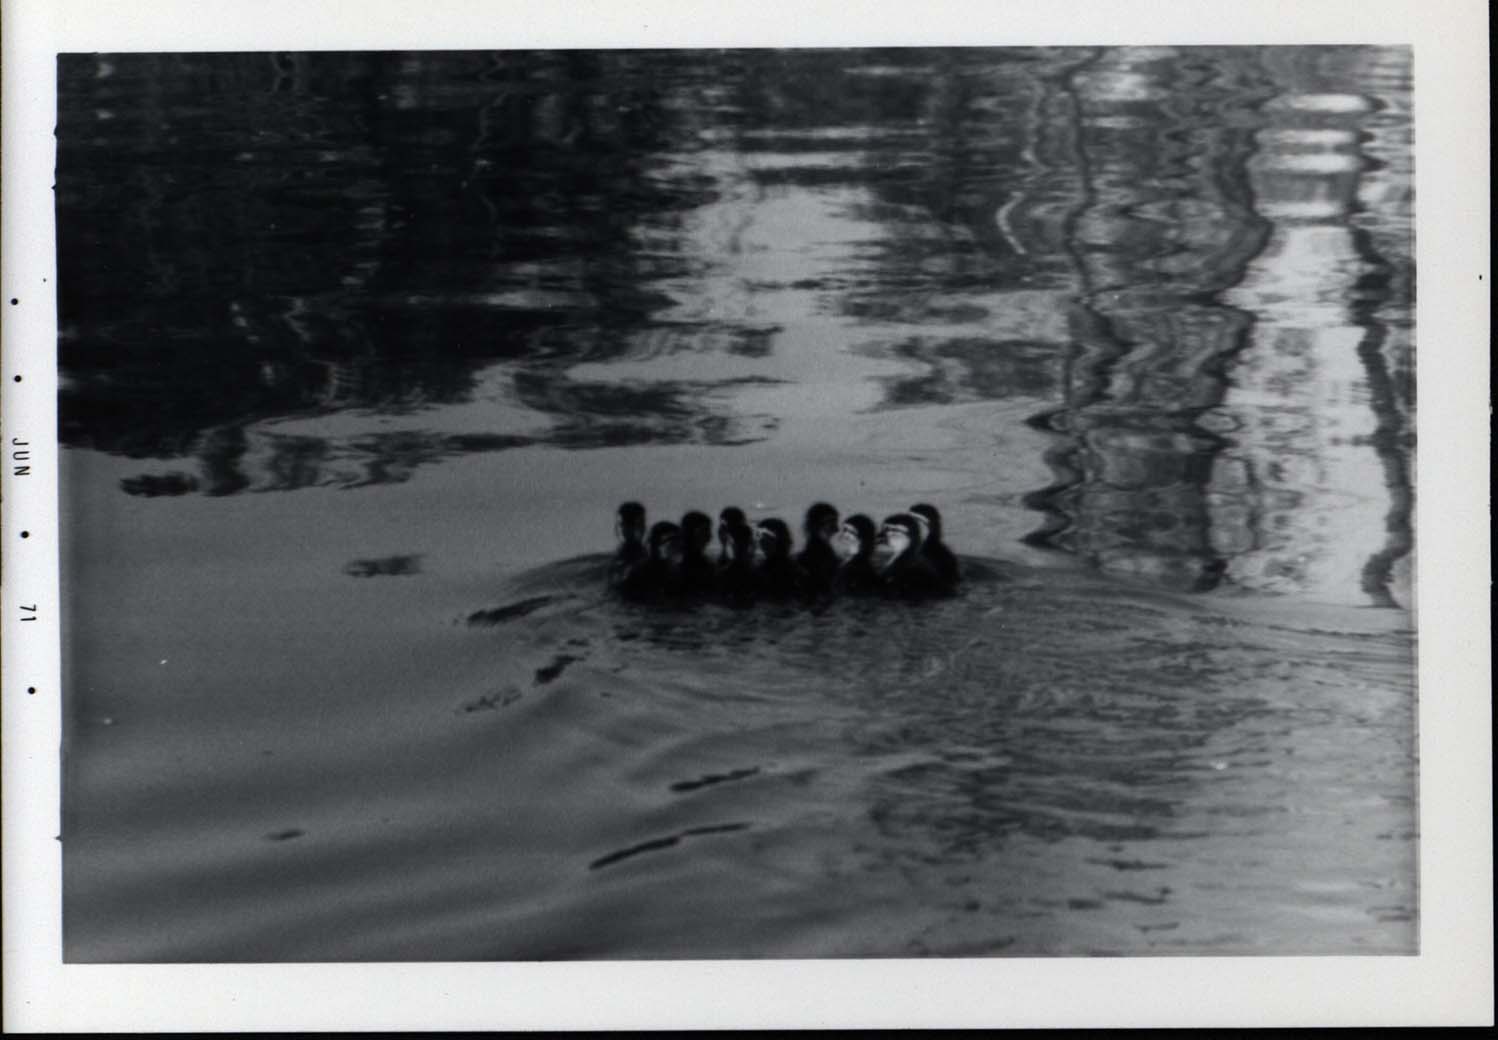 Photograph of Wood Duck ducklings swimming